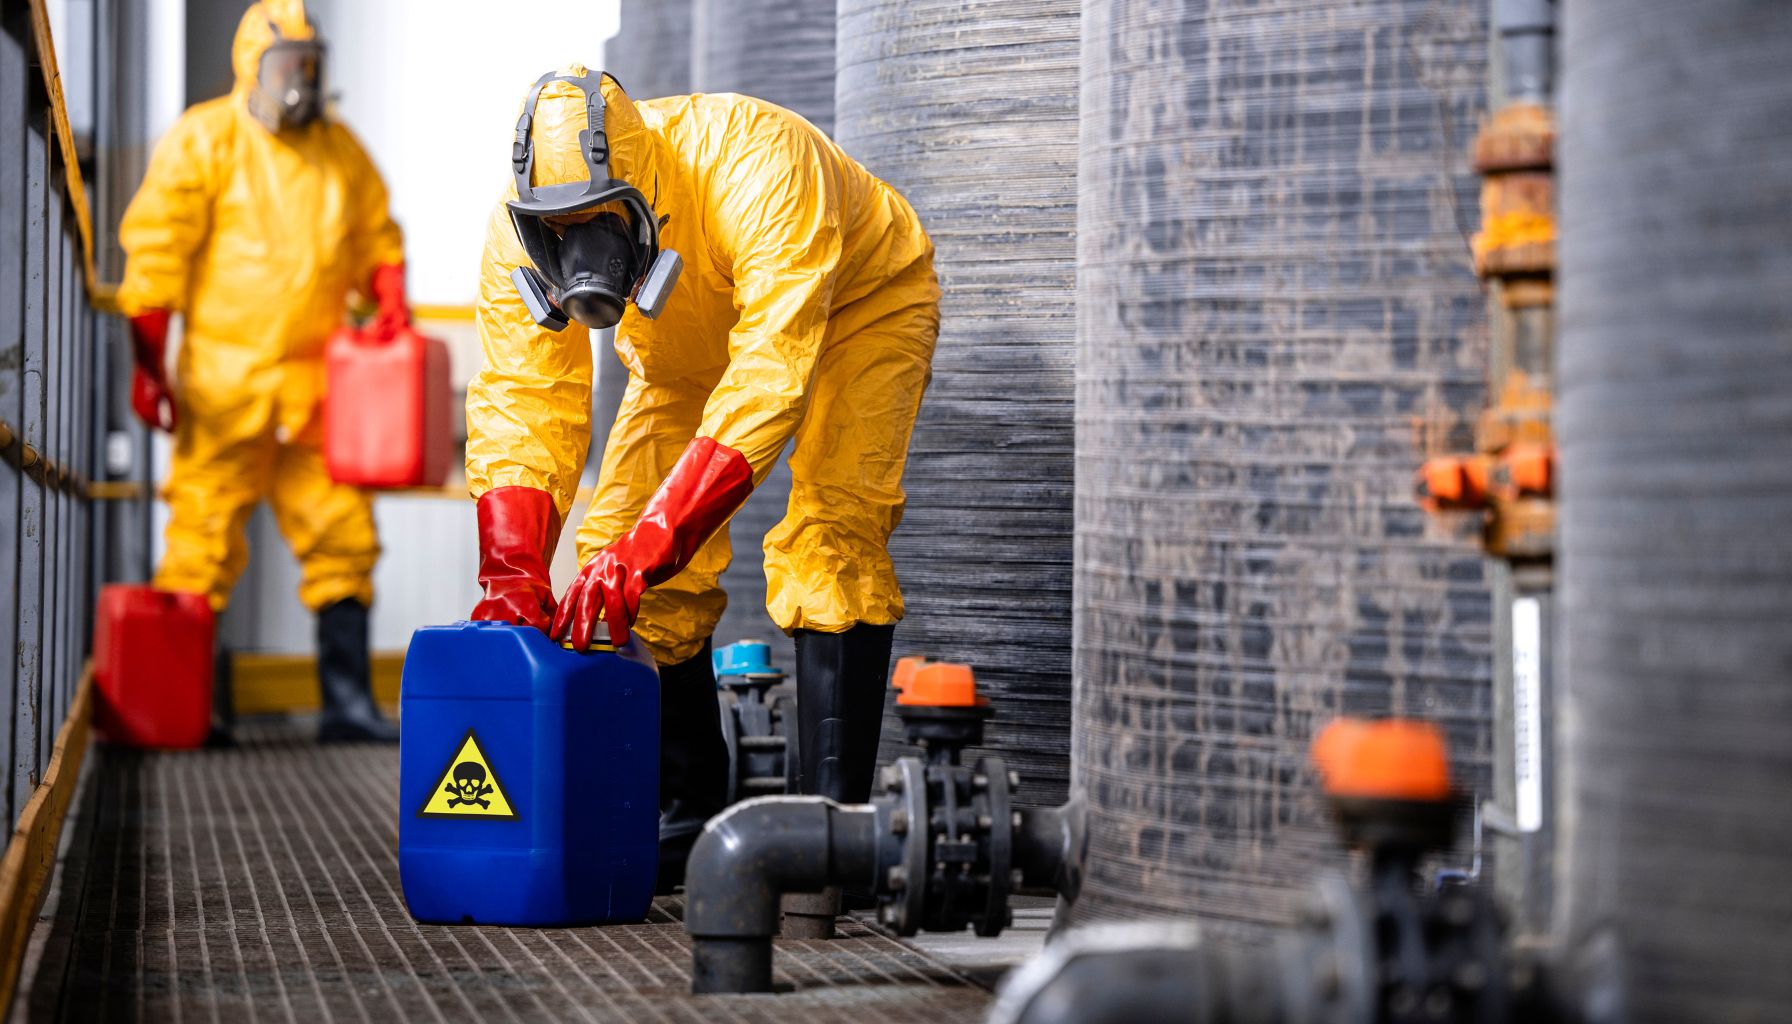 Two workers in yellow hazmat suits and gas masks handle containers with biohazard symbols in an industrial setting, possibly related to mold restoration. One worker pours from a red container, while the other handles a blue container. -PureOneServices